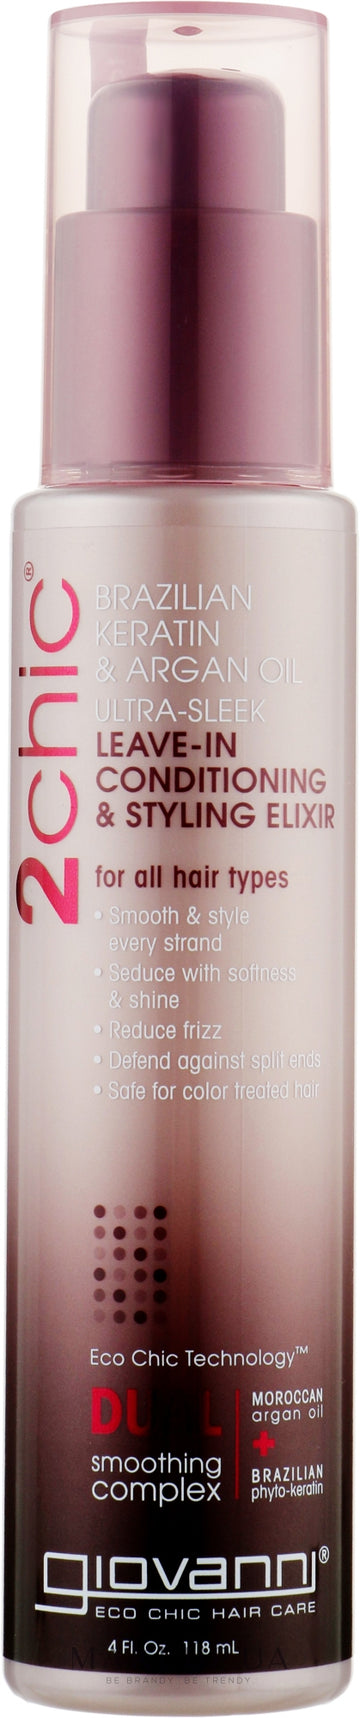 Giovanni - 2chic Ultra Sleek Leave-in Conditioning & Styling Elixir